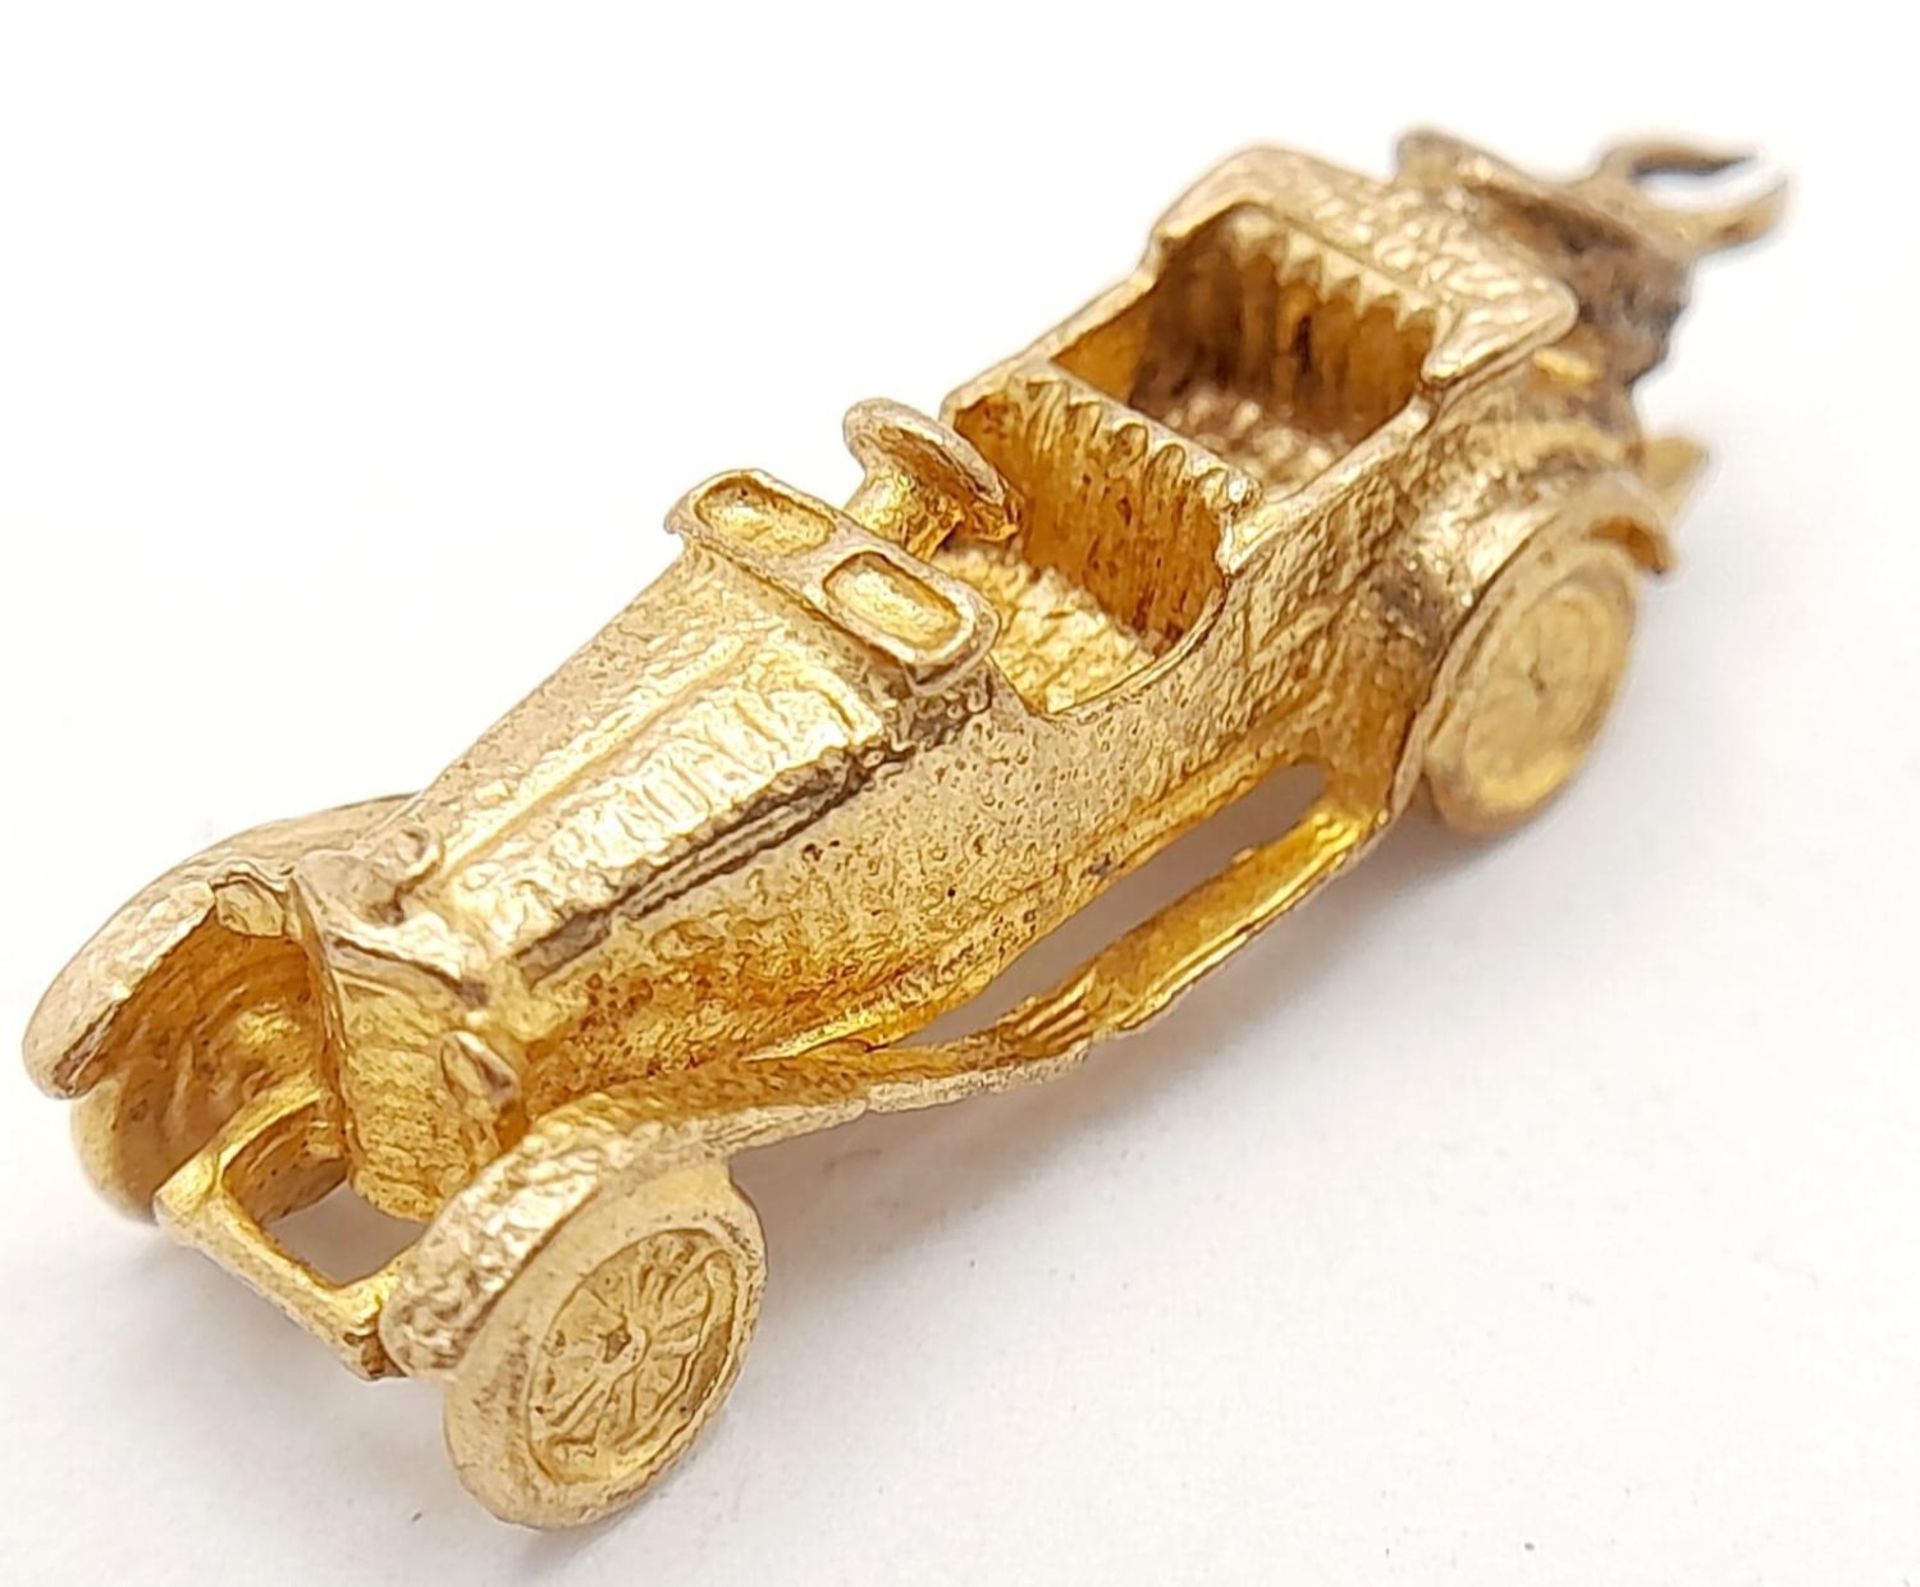 A 9K Yellow Gold Vintage Motorcar Pendant/Charm. 25mm. 3.56g - Image 2 of 8